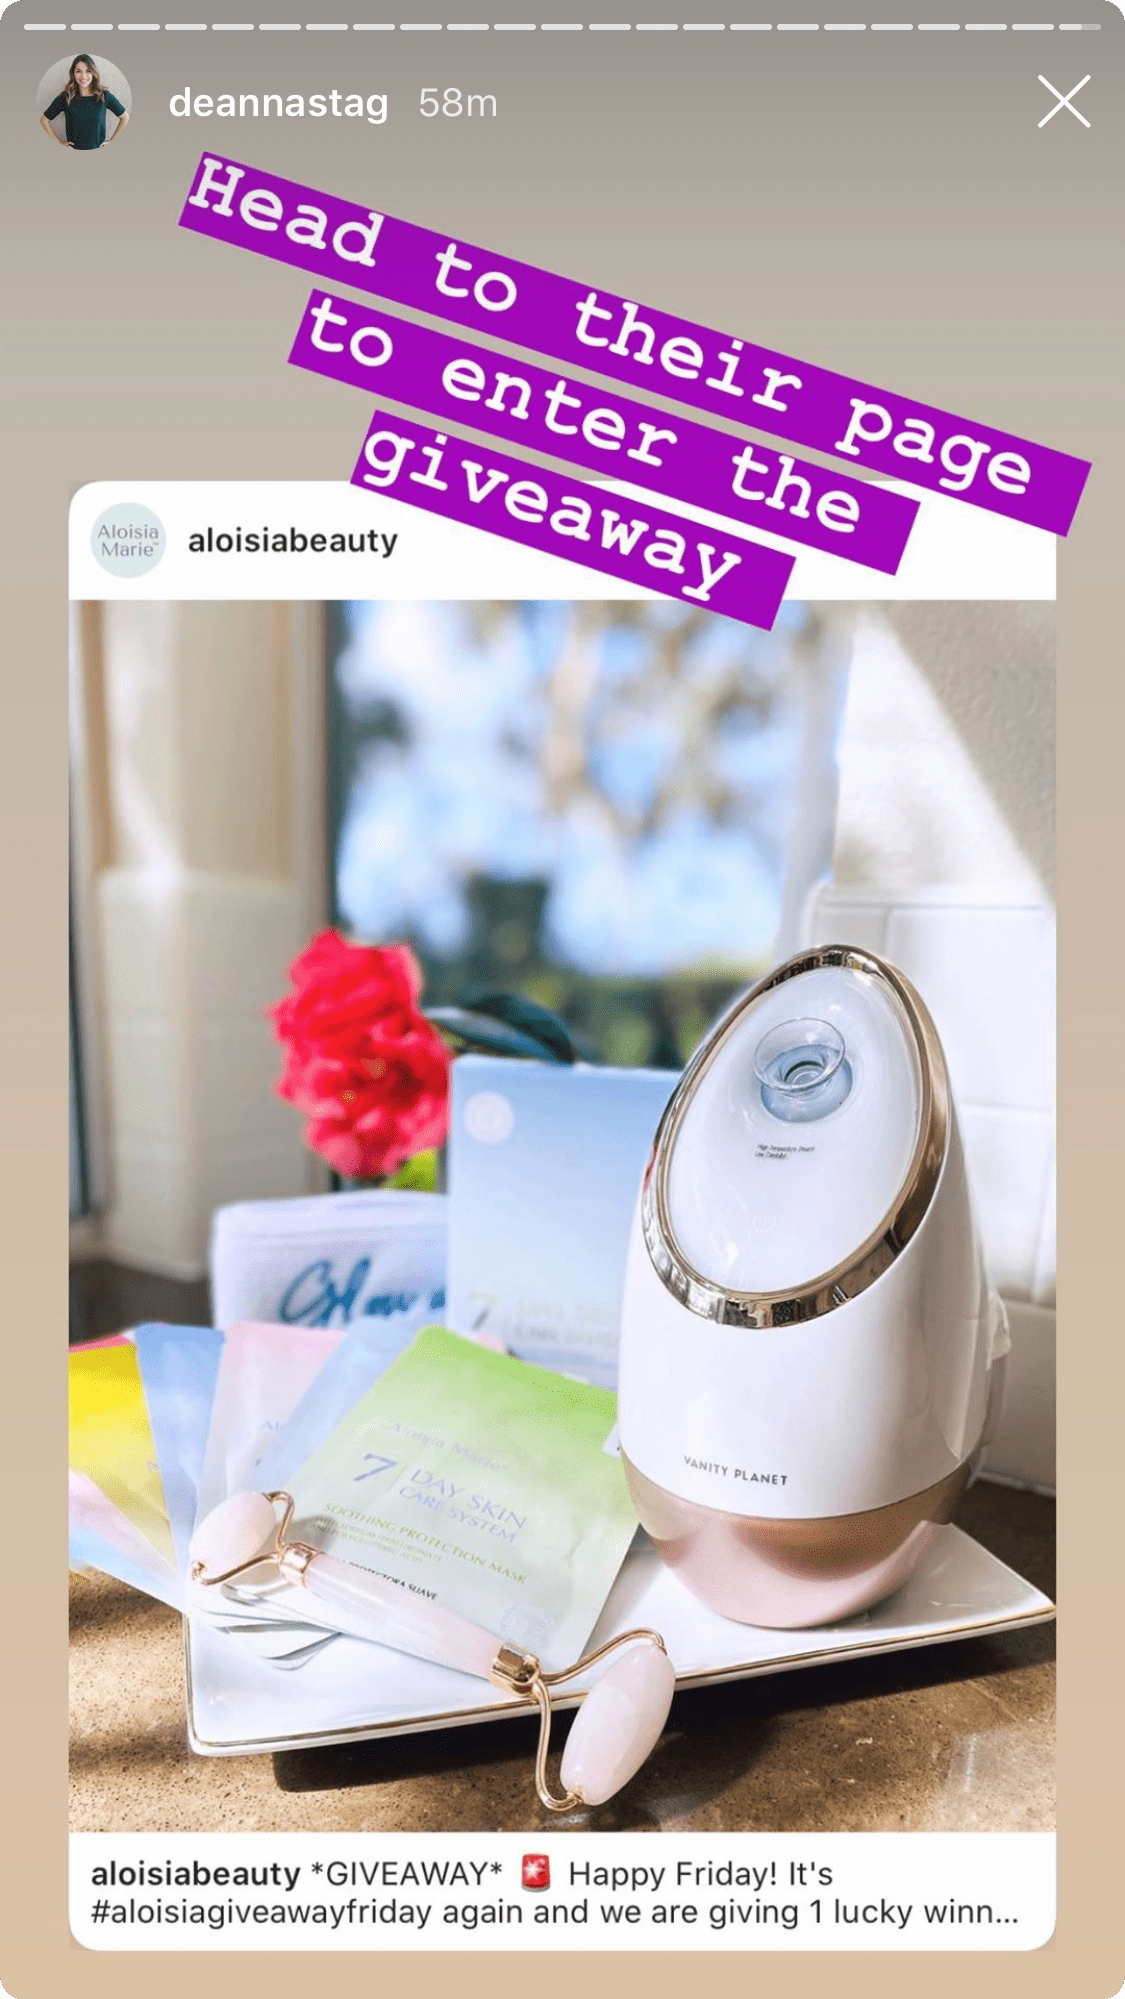 DeAnna Stagliano mentioning Aloisa Beauty in her Instagram Stories